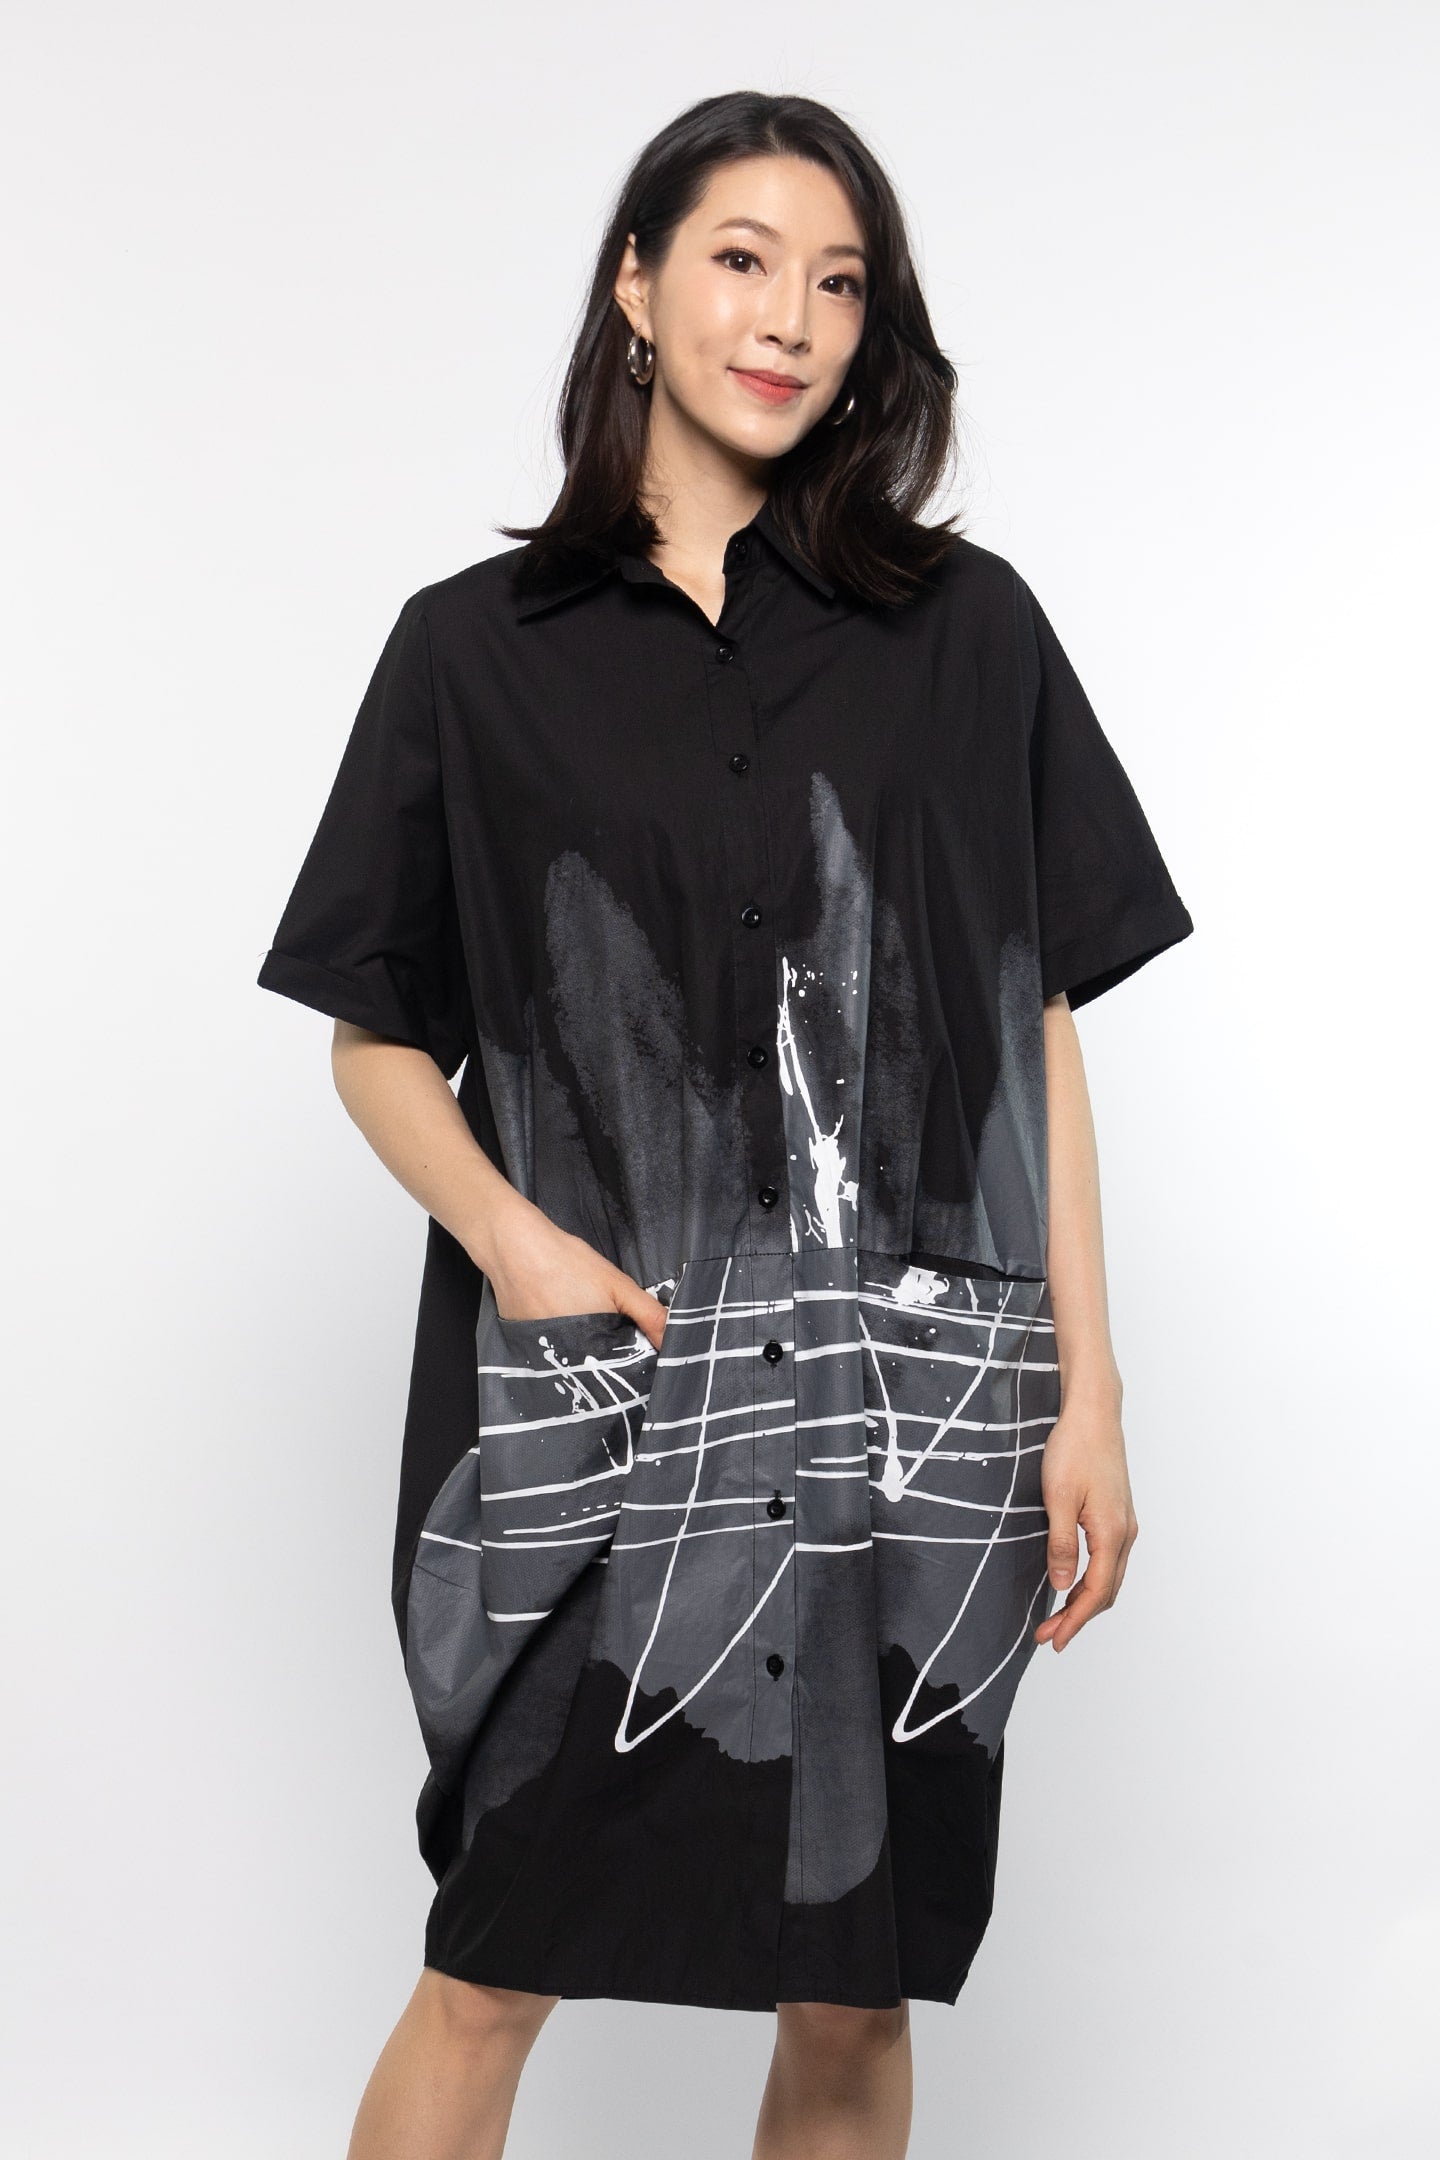 Isador Dress in Abstract